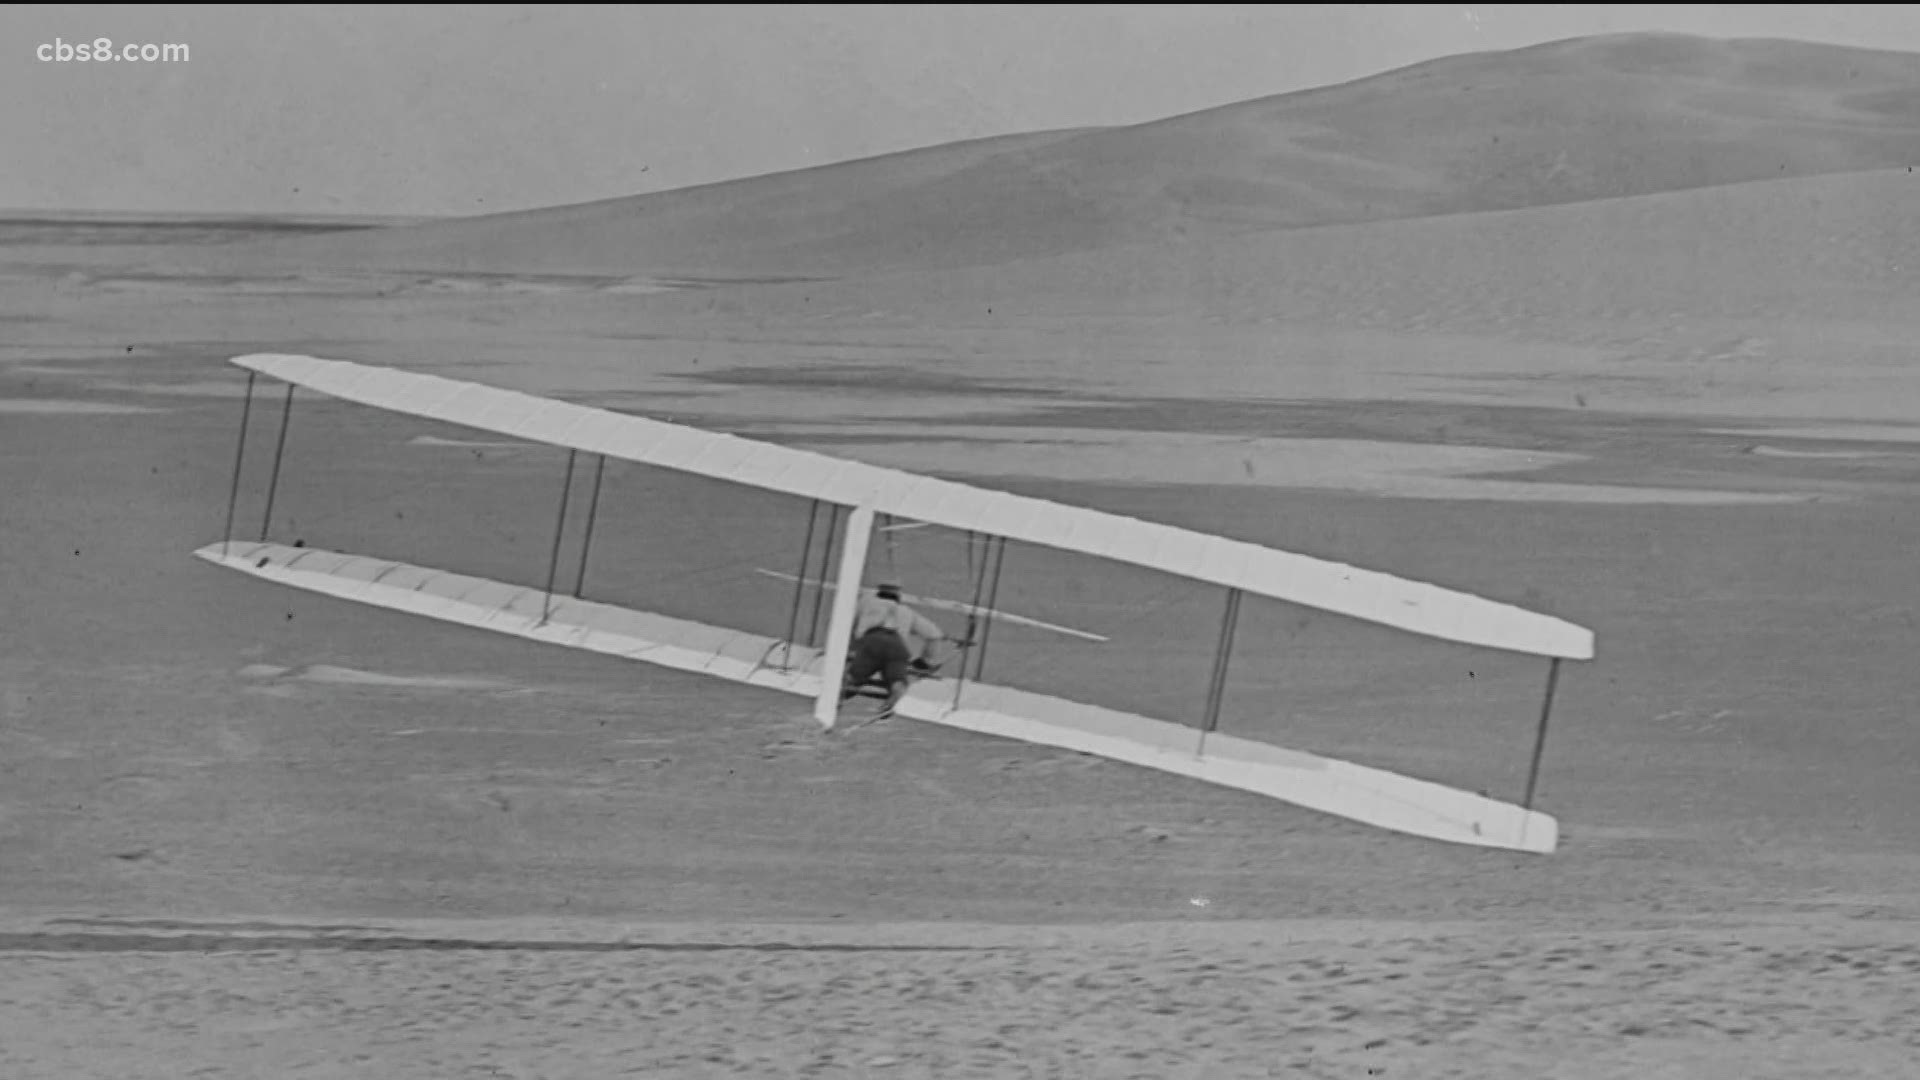 It's been 117 years since the Wright brothers made history.